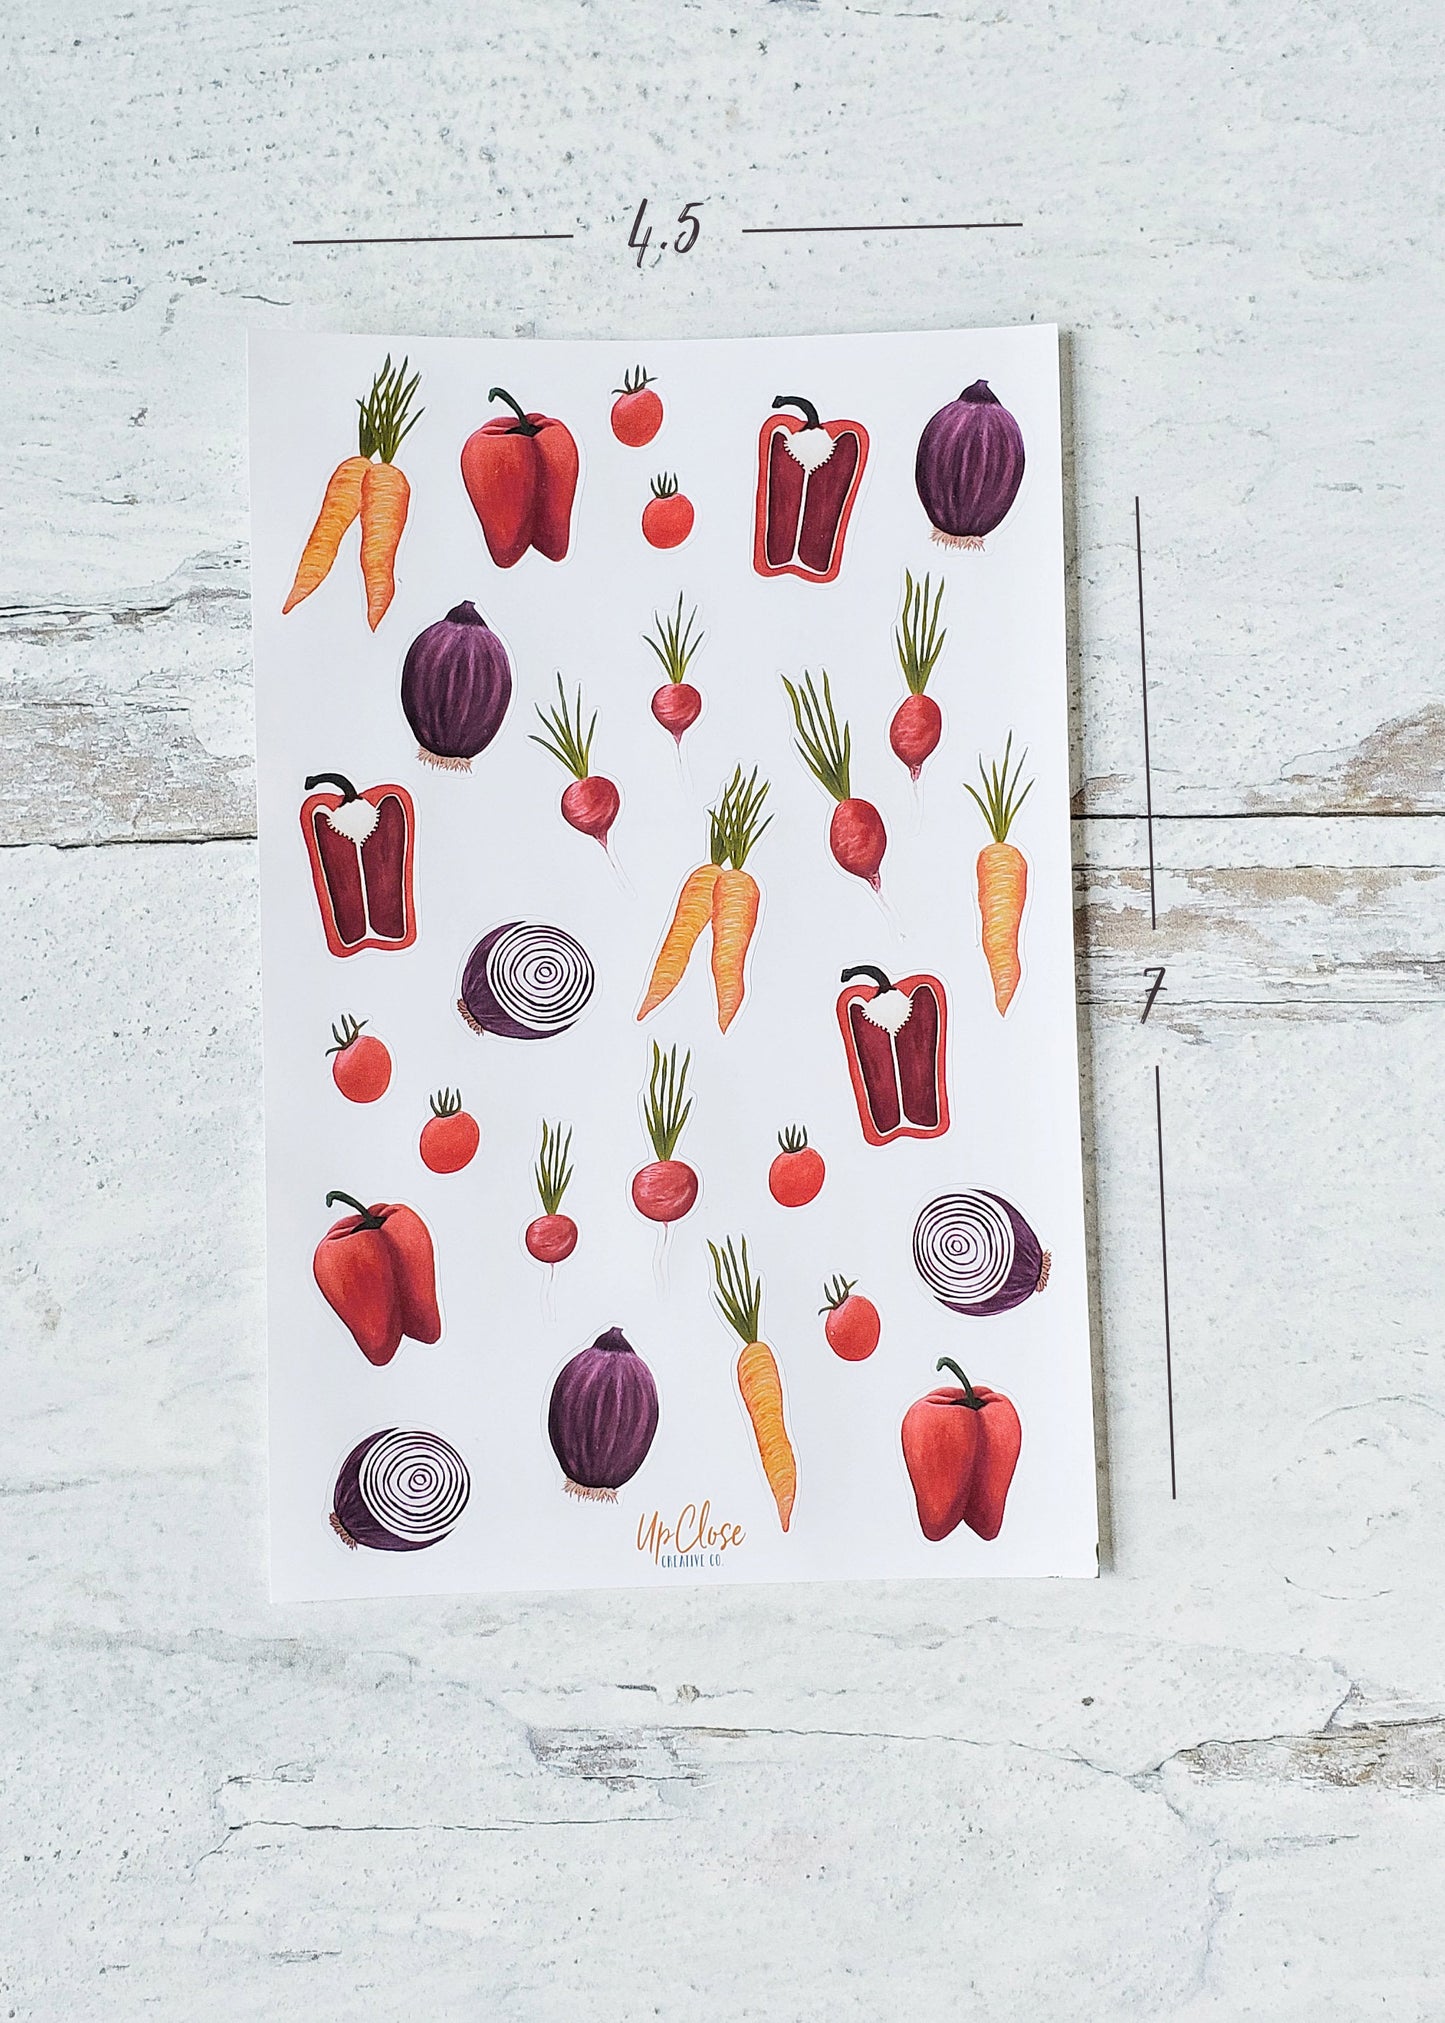 vegetable sticker sheet size 4.5 by 7 inches